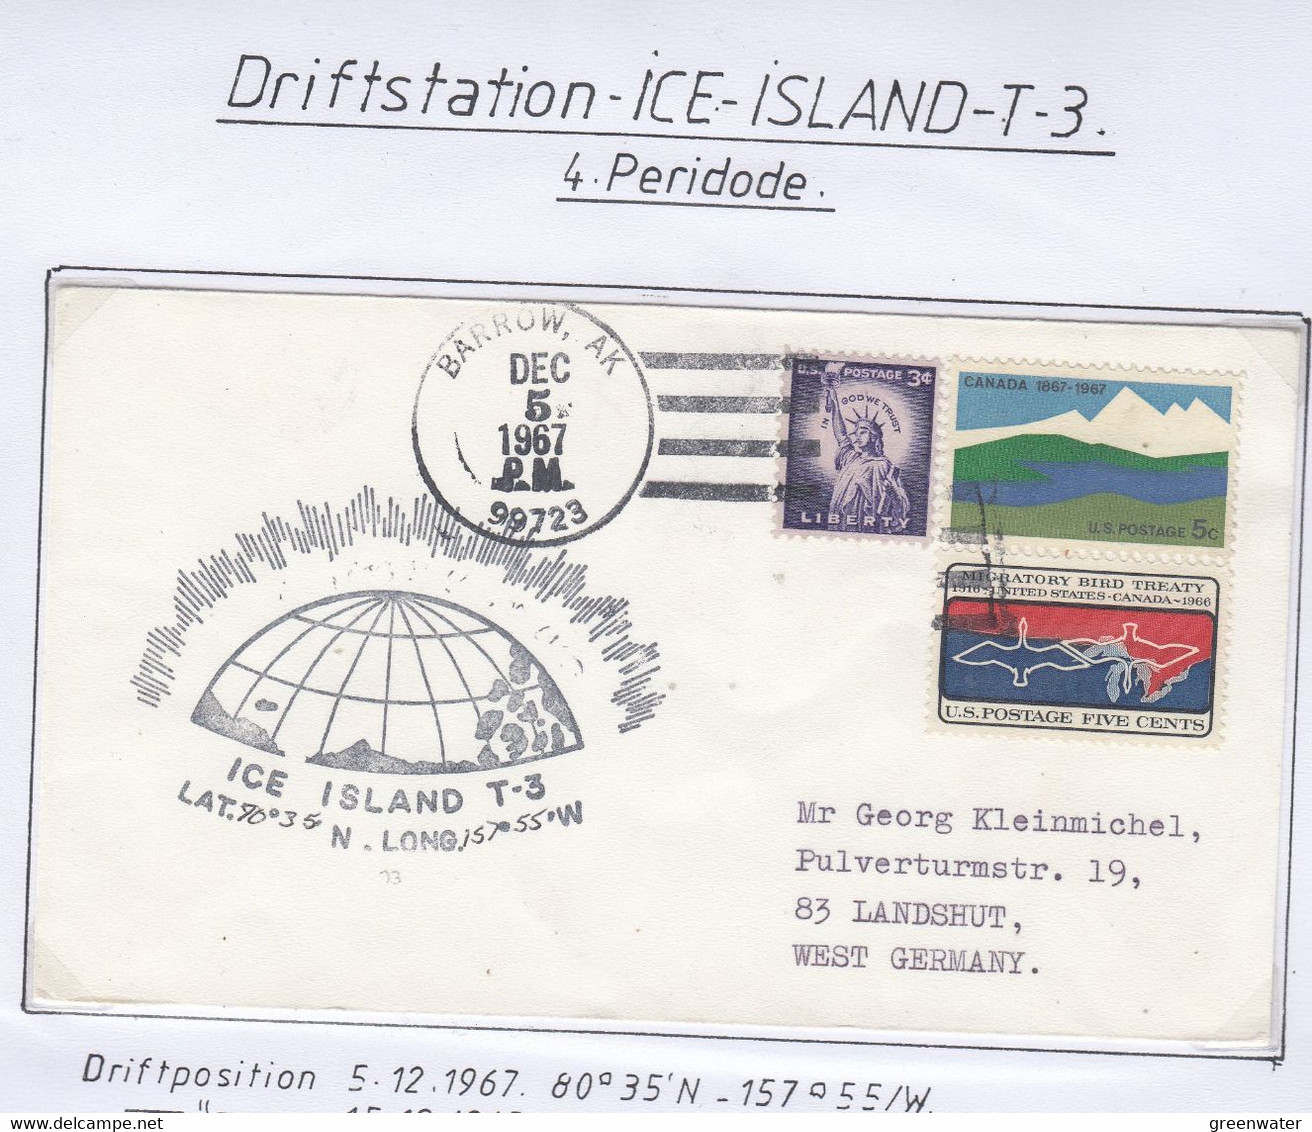 USA Driftstation ICE-ISLAND T-3 Cover Ca Ice Island T-3 Periode 4 Ca  DEC 5 1967 Signature  (DR126) - Scientific Stations & Arctic Drifting Stations